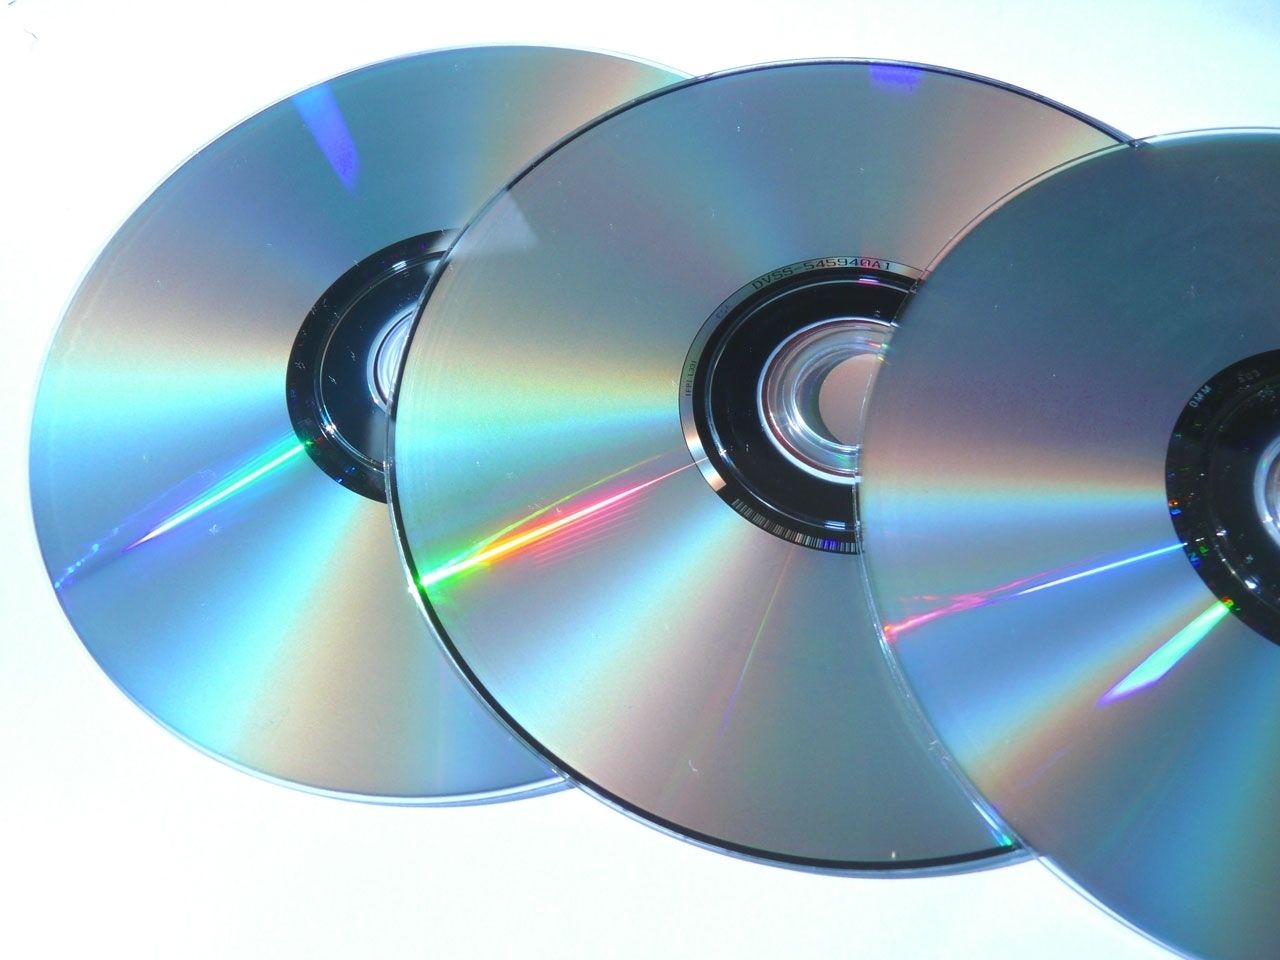 Copyright Law to Allow Digital Copying and Storage of Audio CDs